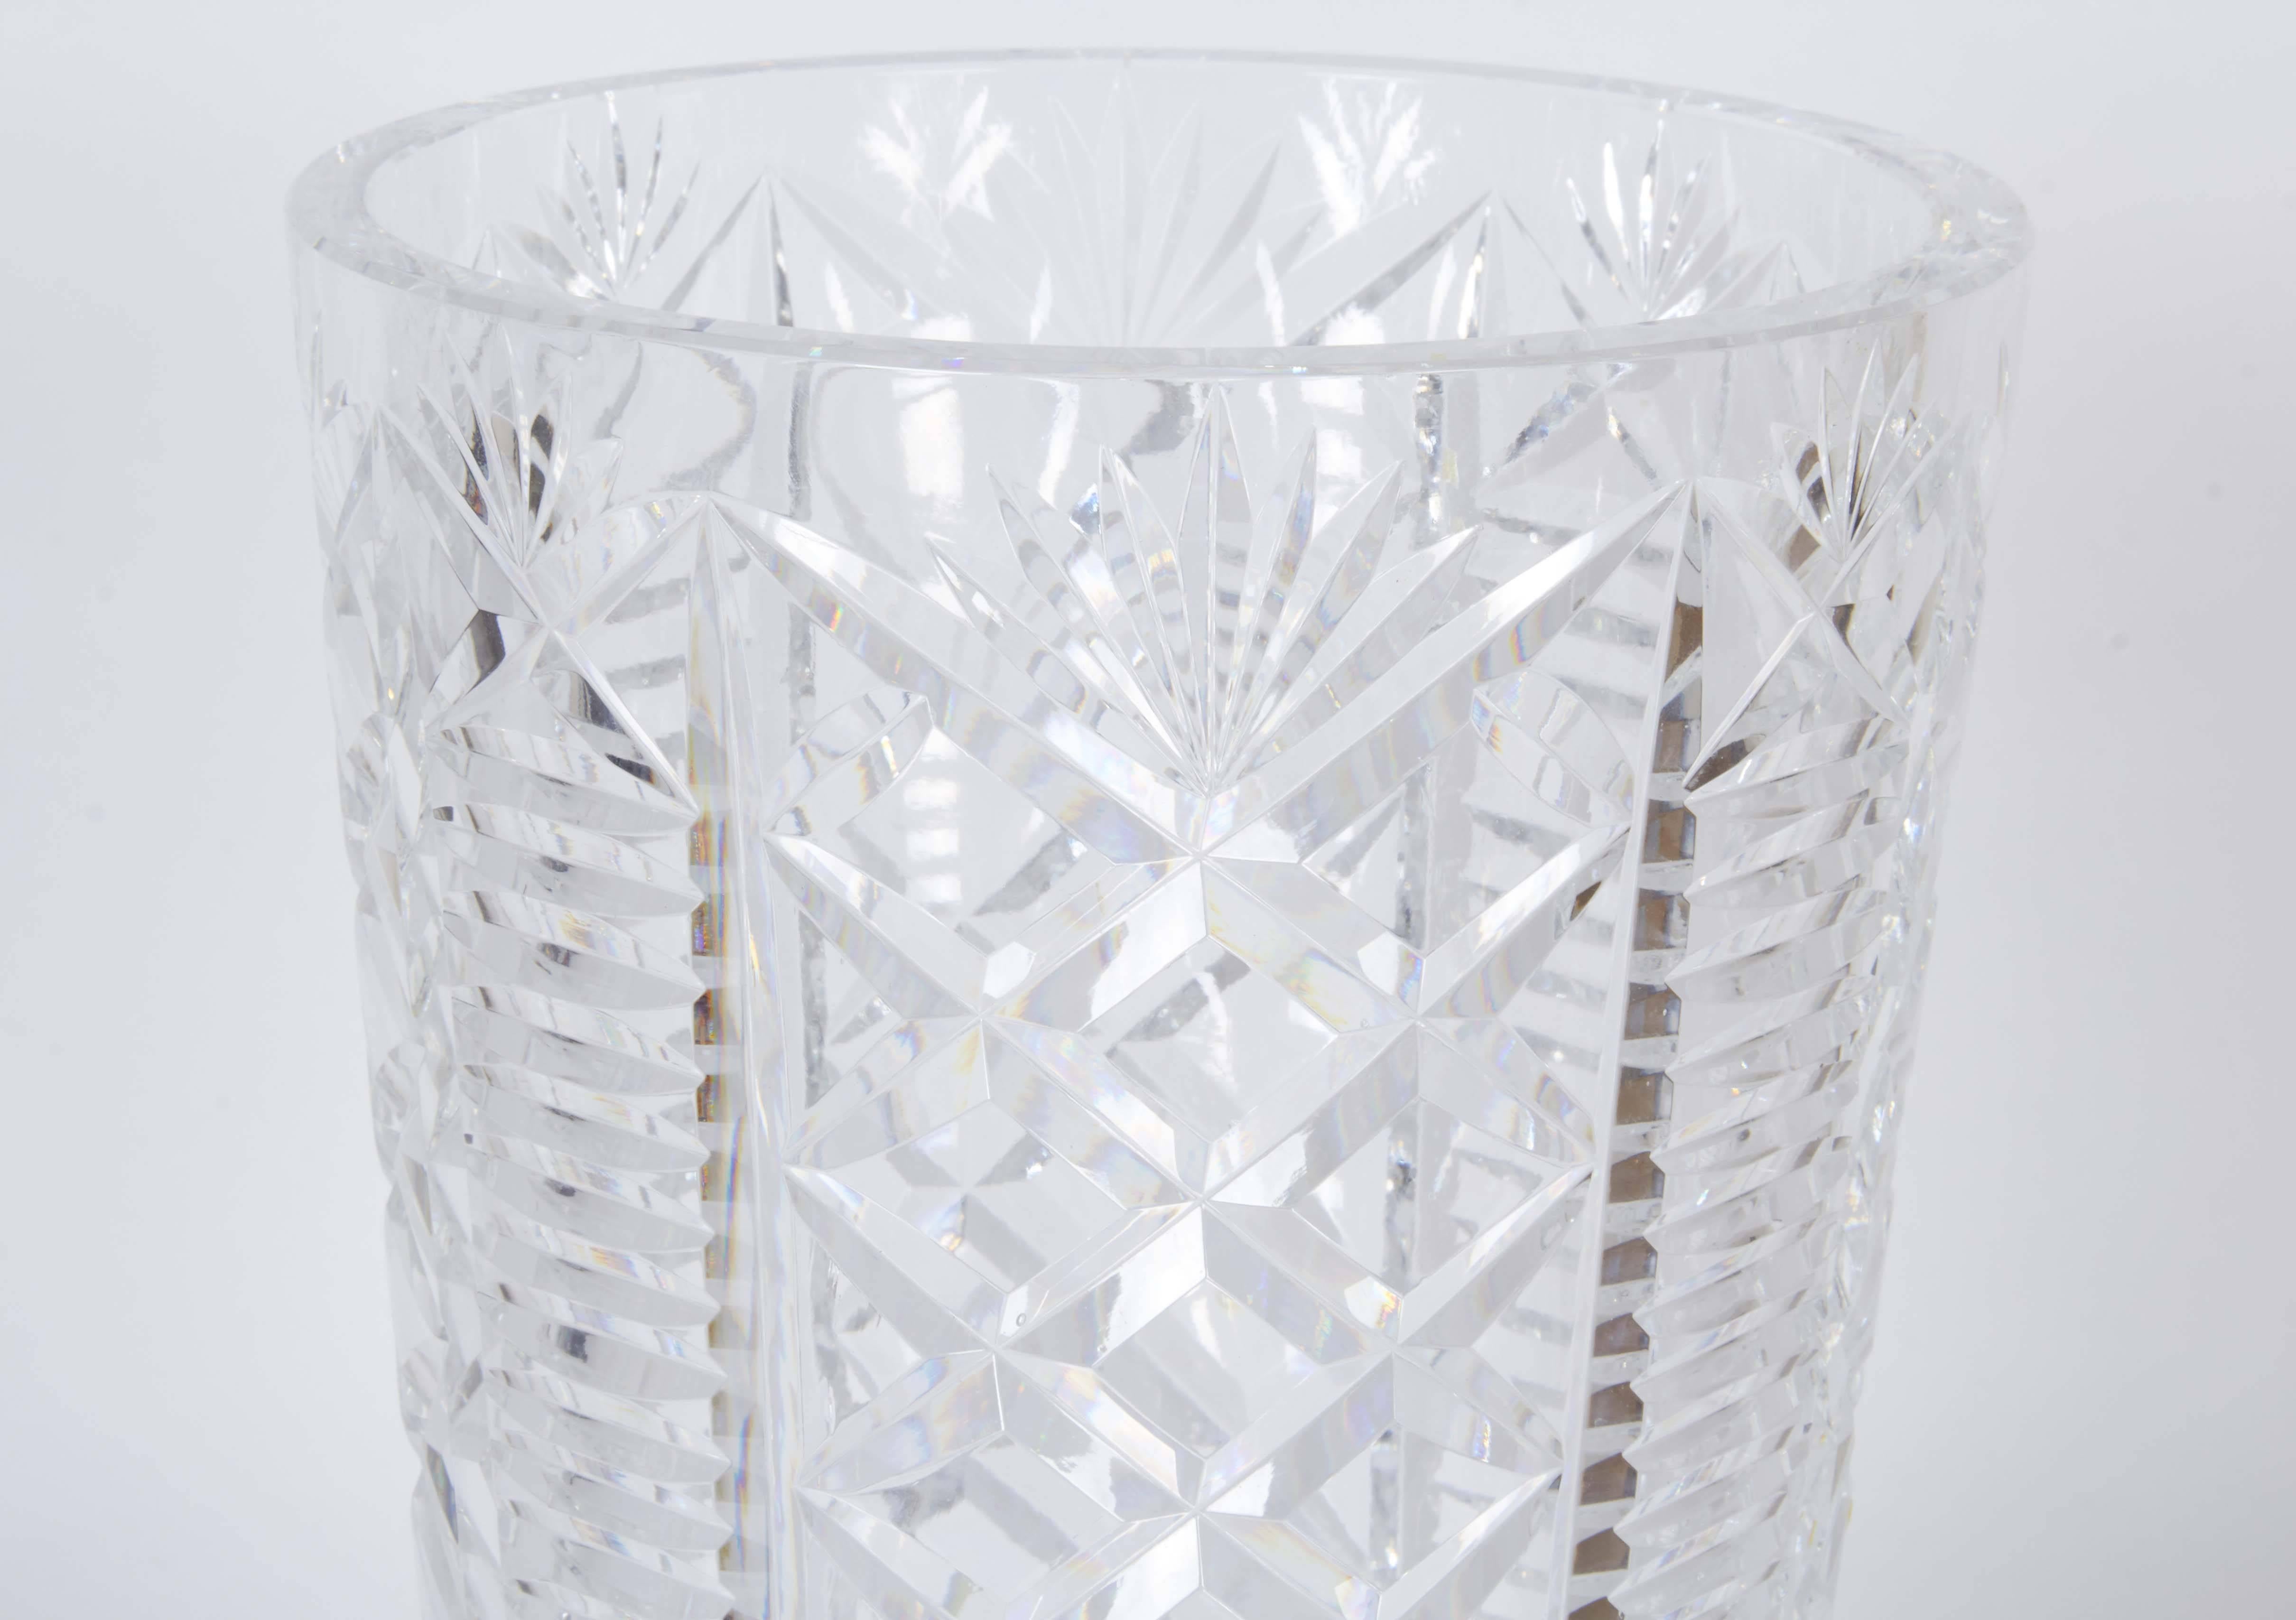 A cut crystal 'Clare' pattern vase, produced circa 1970s by Waterford, of tapered cylindrical form. Very good vintage condition, with minuscule chips to base.

10937